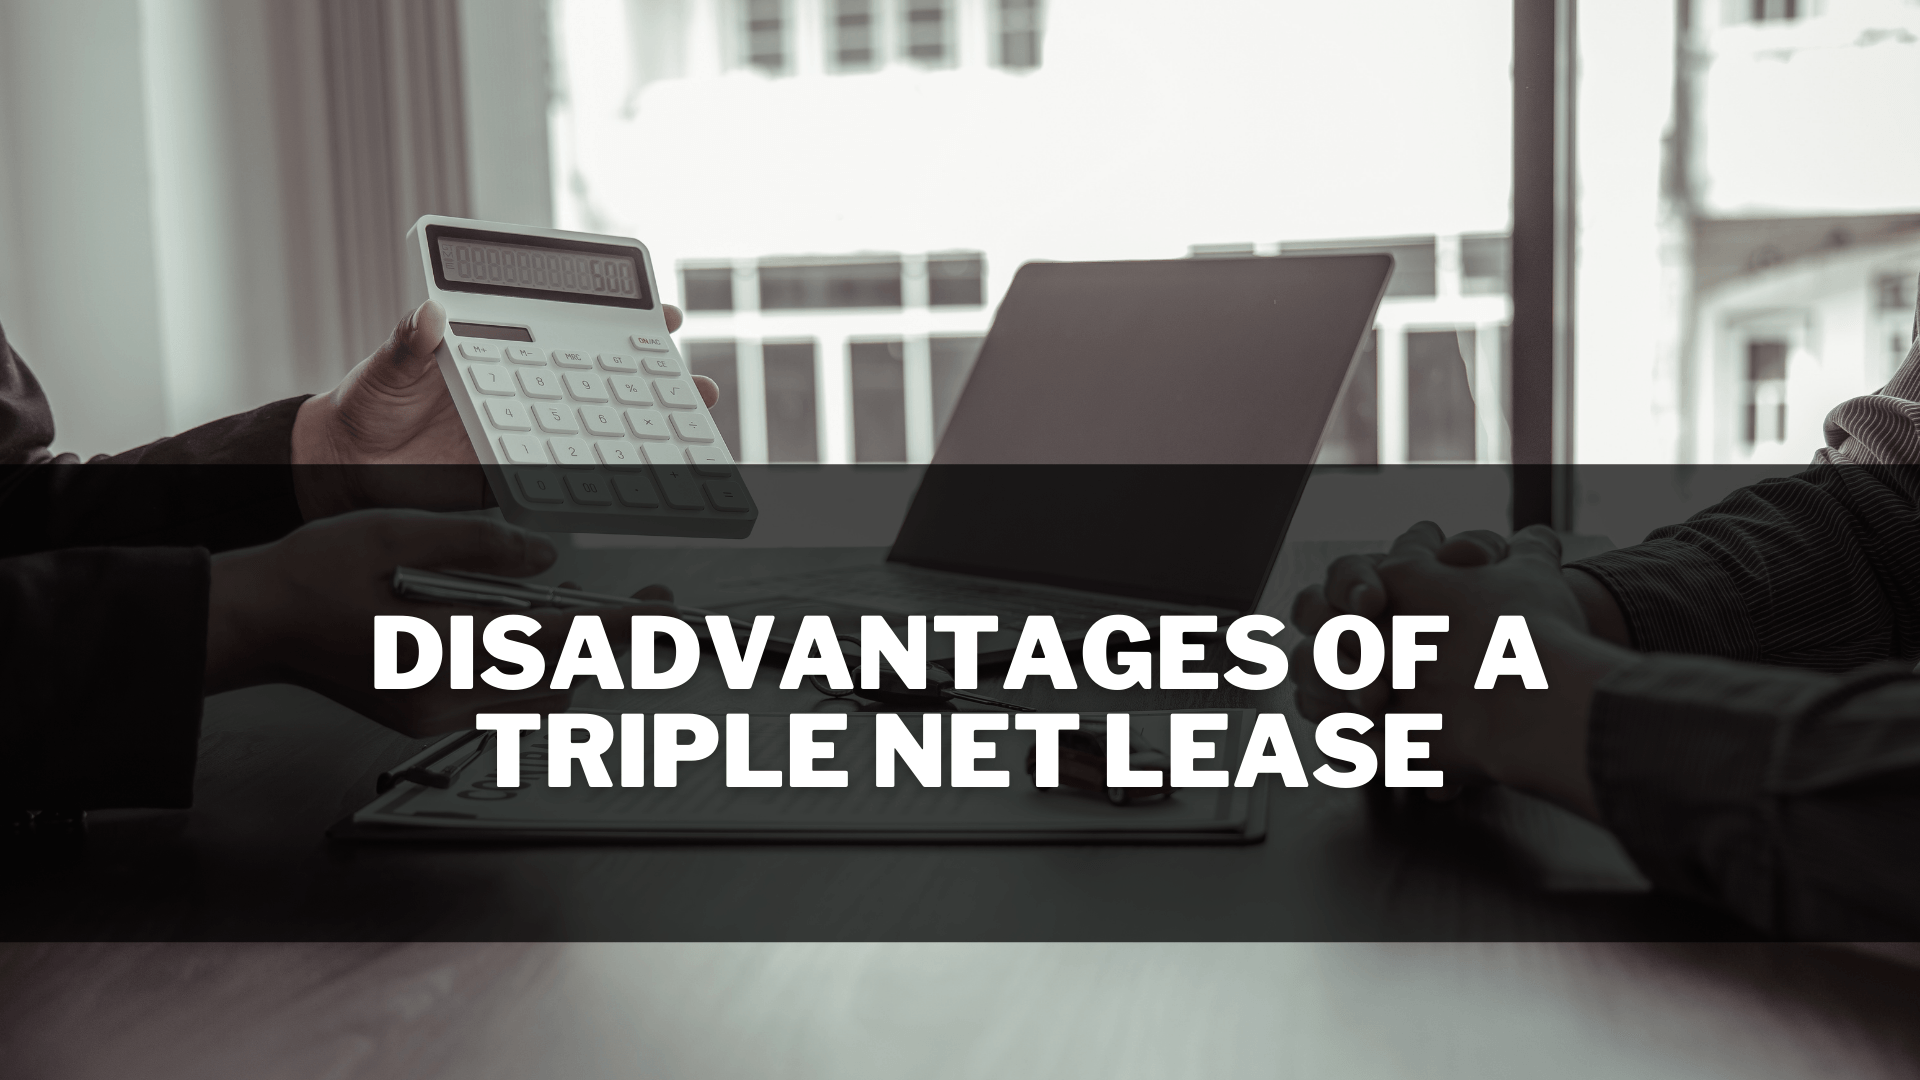 Analyzing the disadvantages of a triple net lease in a business meeting.